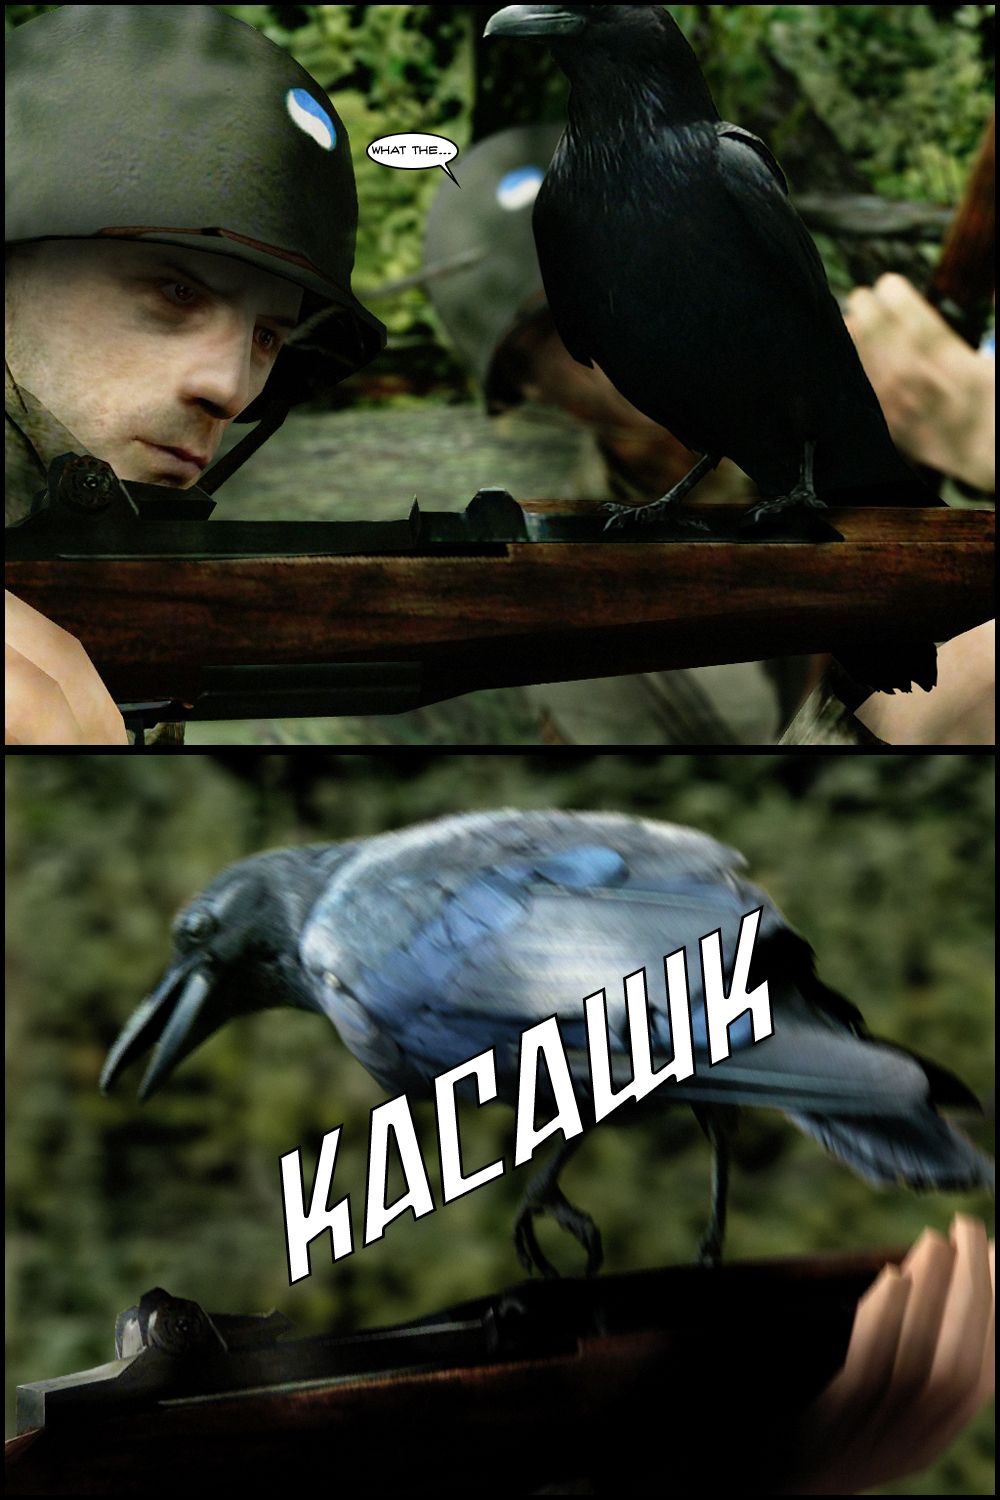 They're all surprised when a crow suddenly lands on one of their M1 Garand rifles. The crow caws at them menacingly.